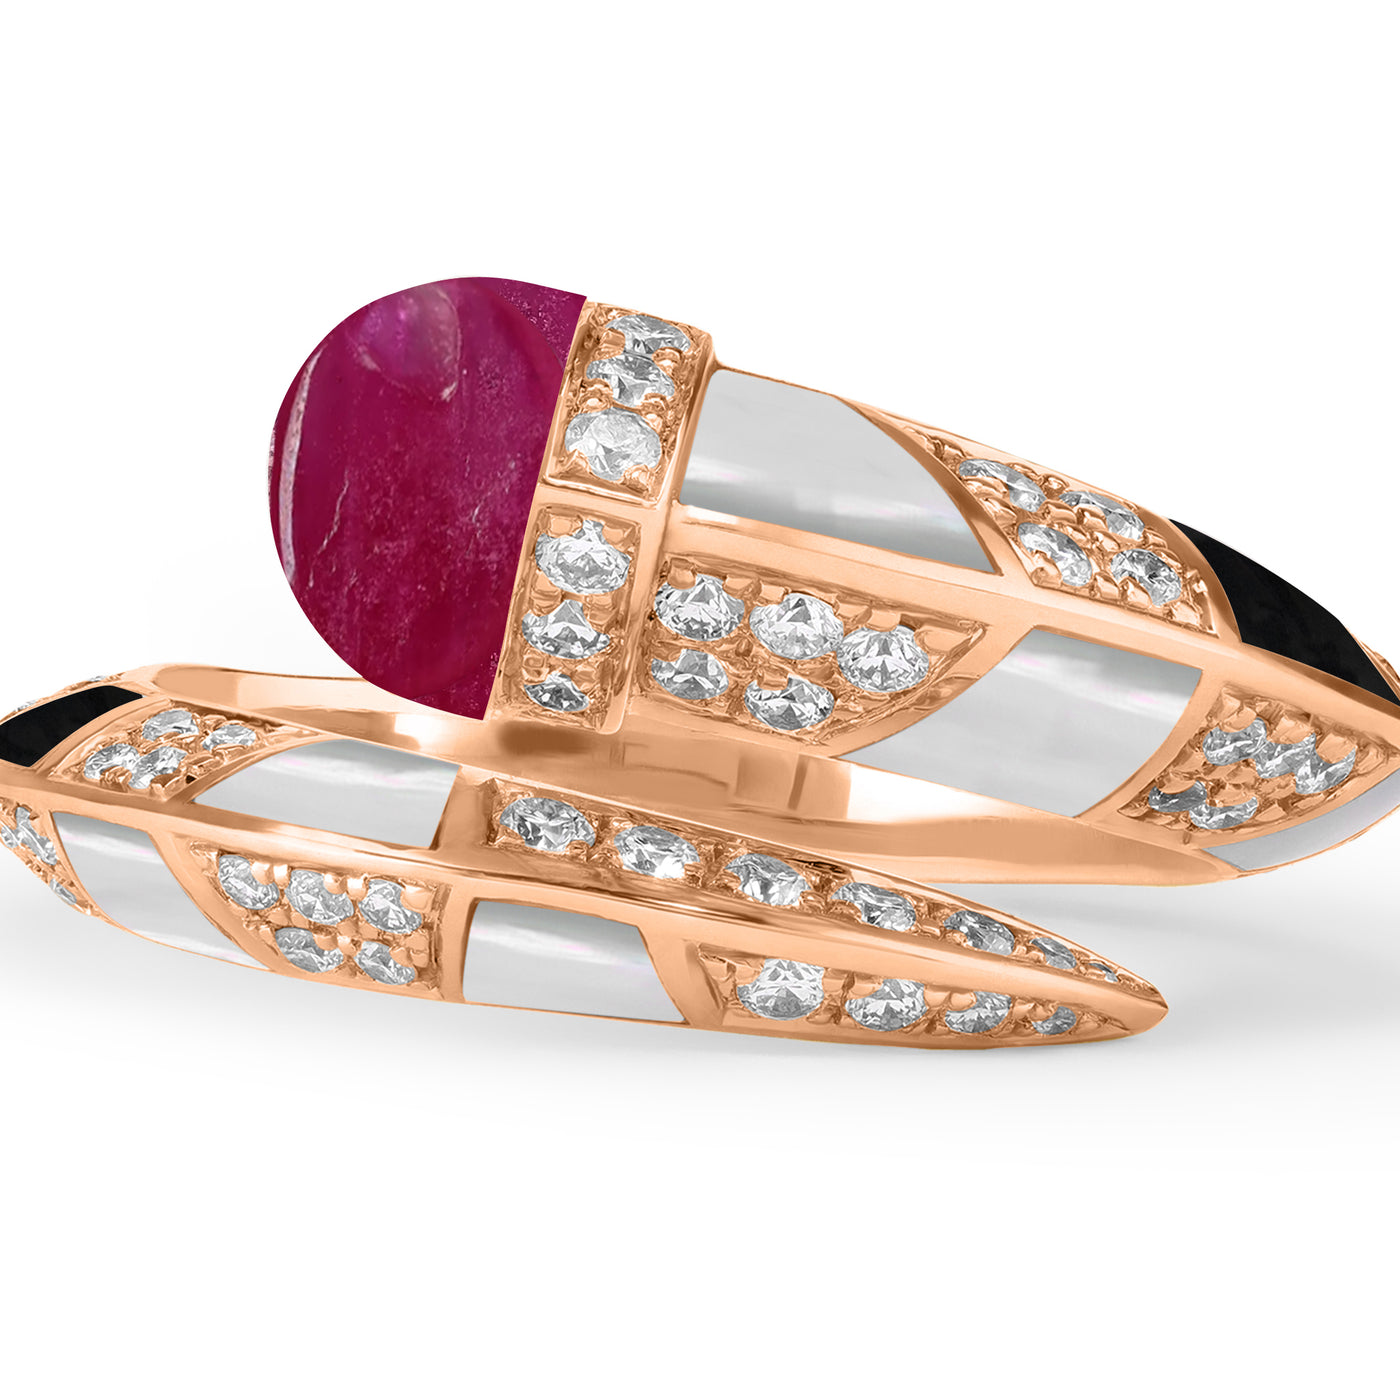 ARTISTRY Rose Gold Diamond Ring With Natural Ruby